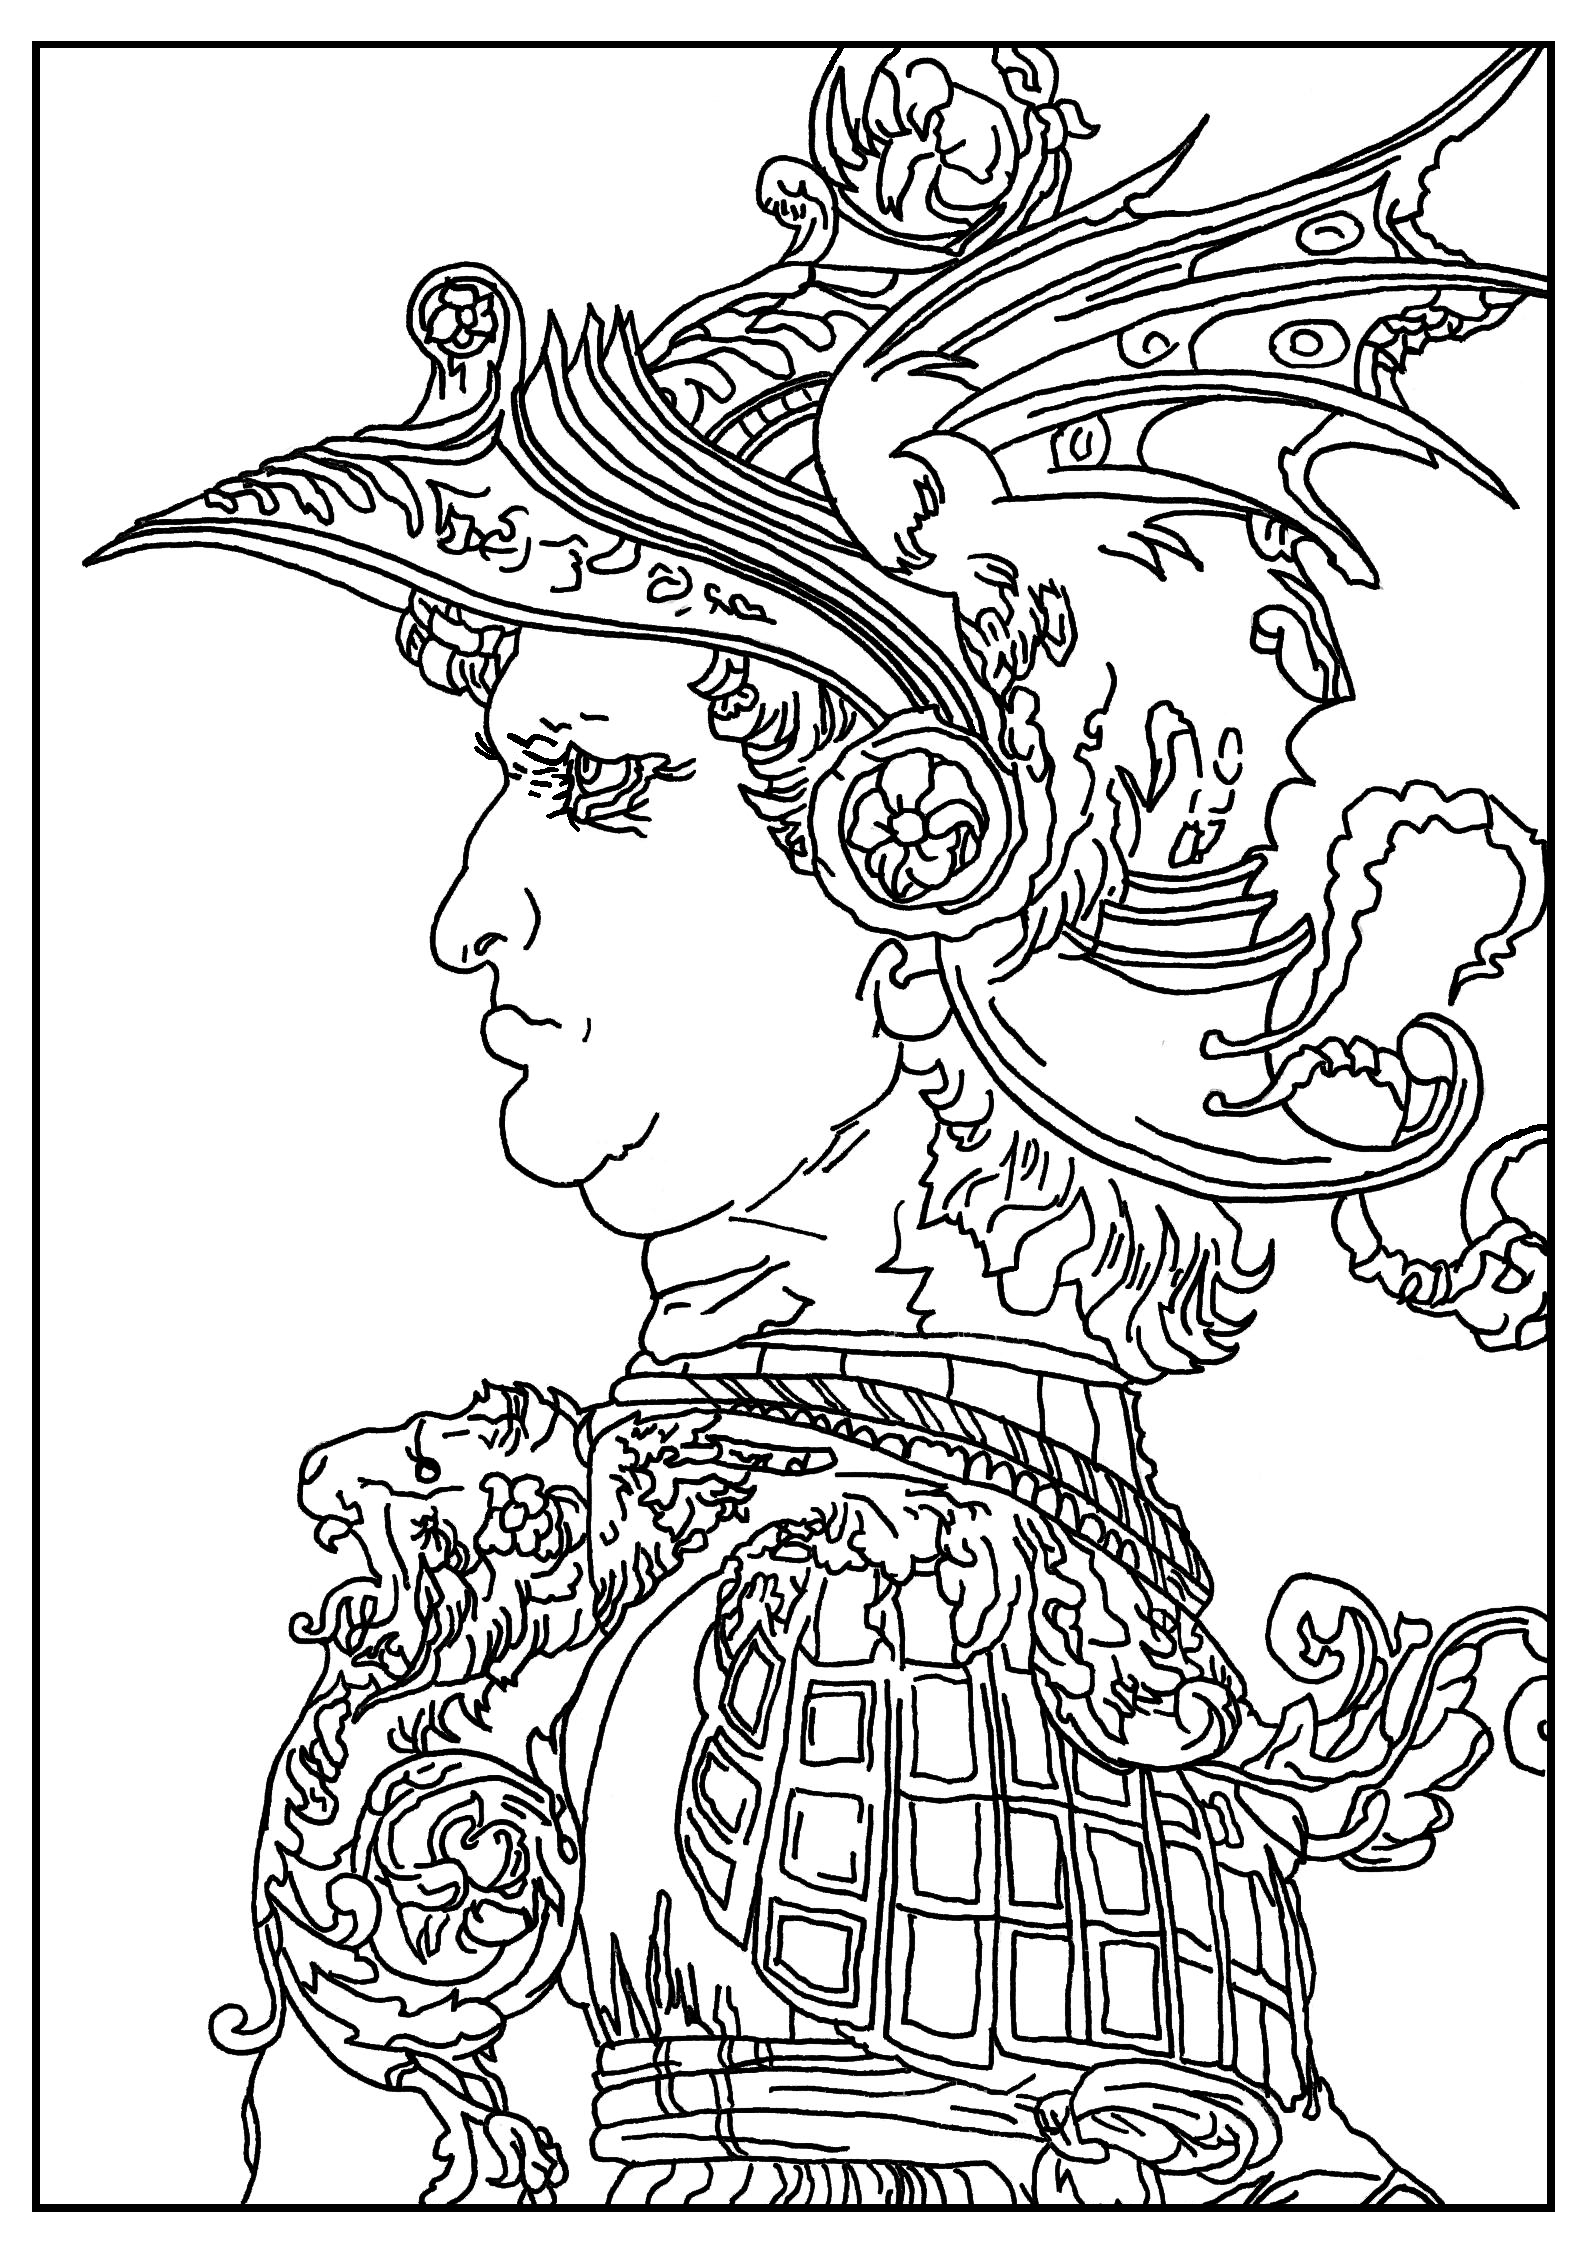 Coloring page created from a drawing by Leonardo Da Vinci : Profile of a warrior in helmet (1477)